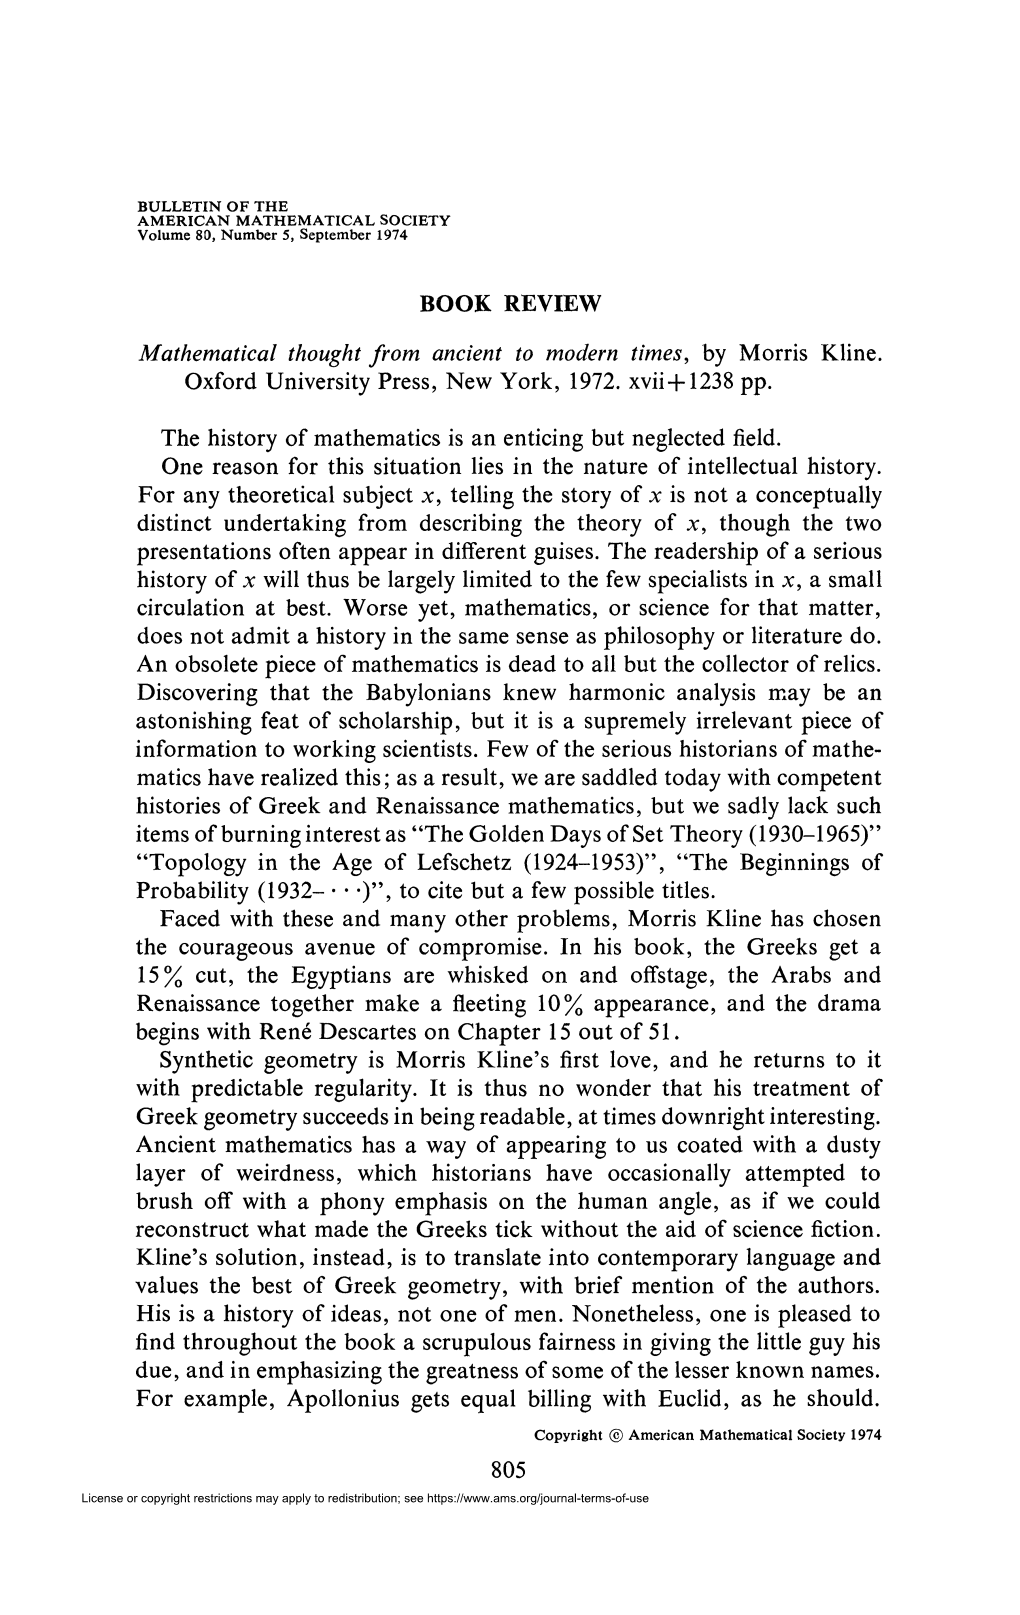 BOOK REVIEW Mathematical Thought from Ancient to Modem Times, by Morris Kline. Oxford University Press, New York, 1972. Xvii